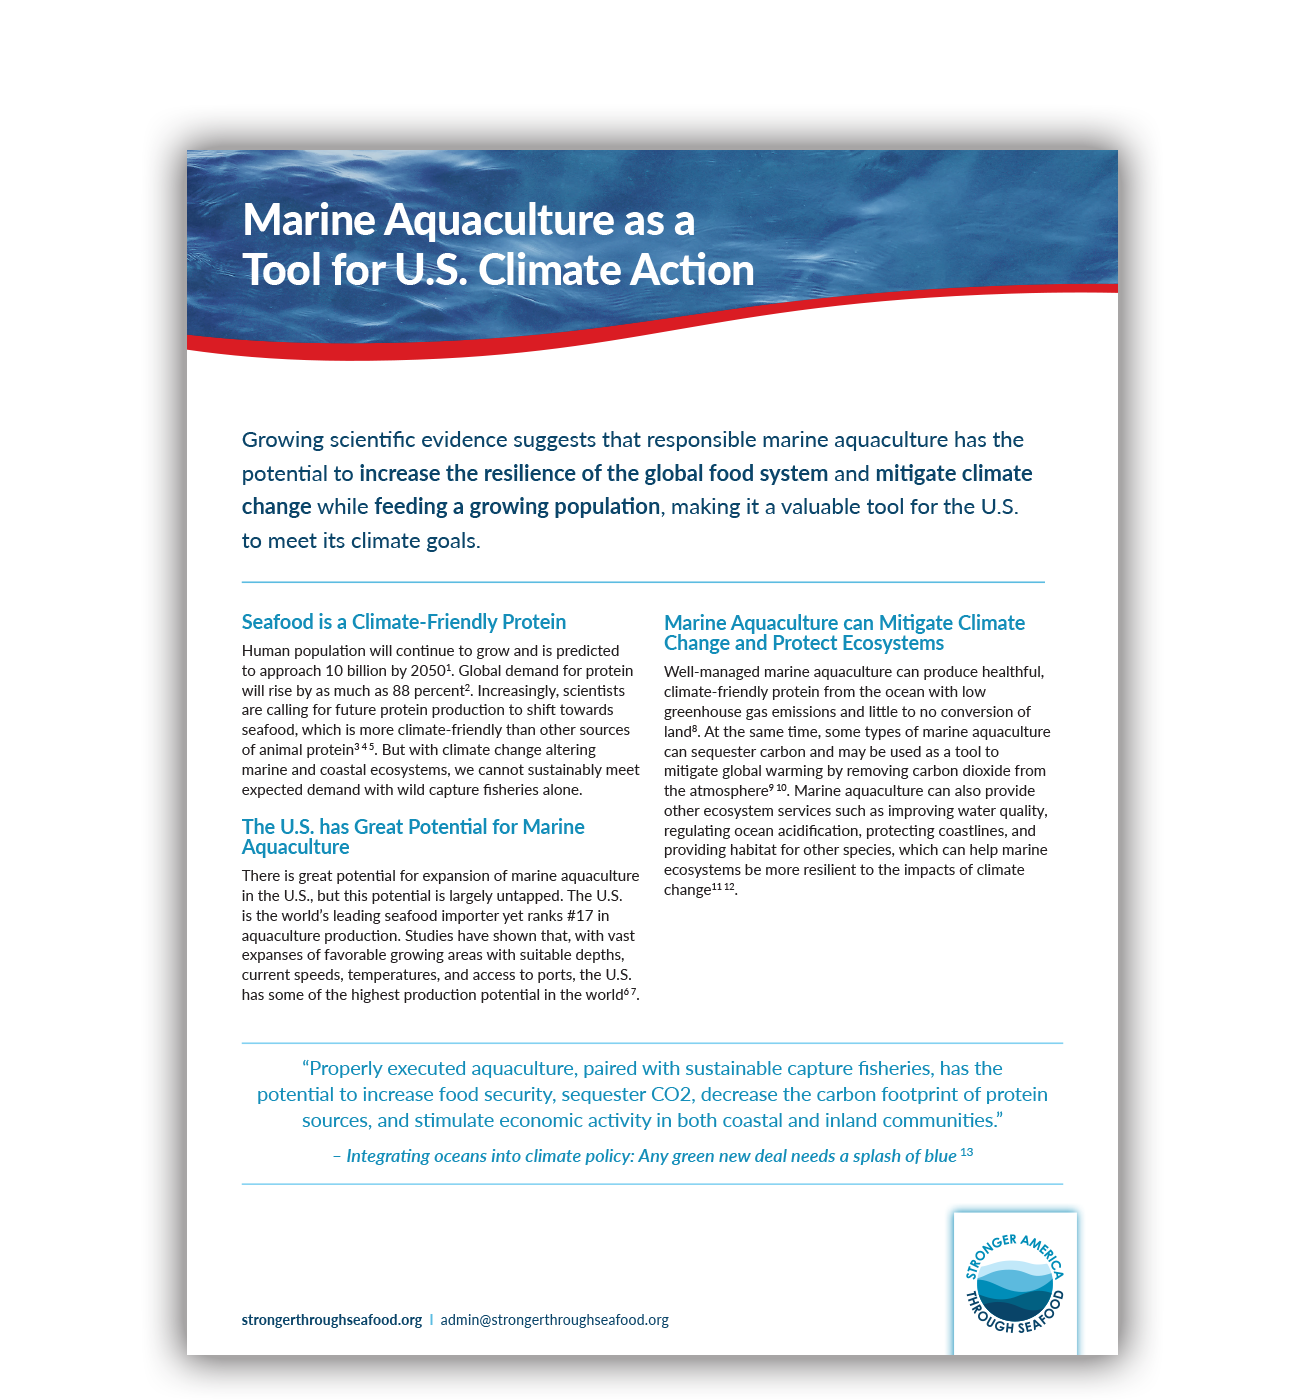 Marine Aquaculture as a Tool for U.S. Climate Action